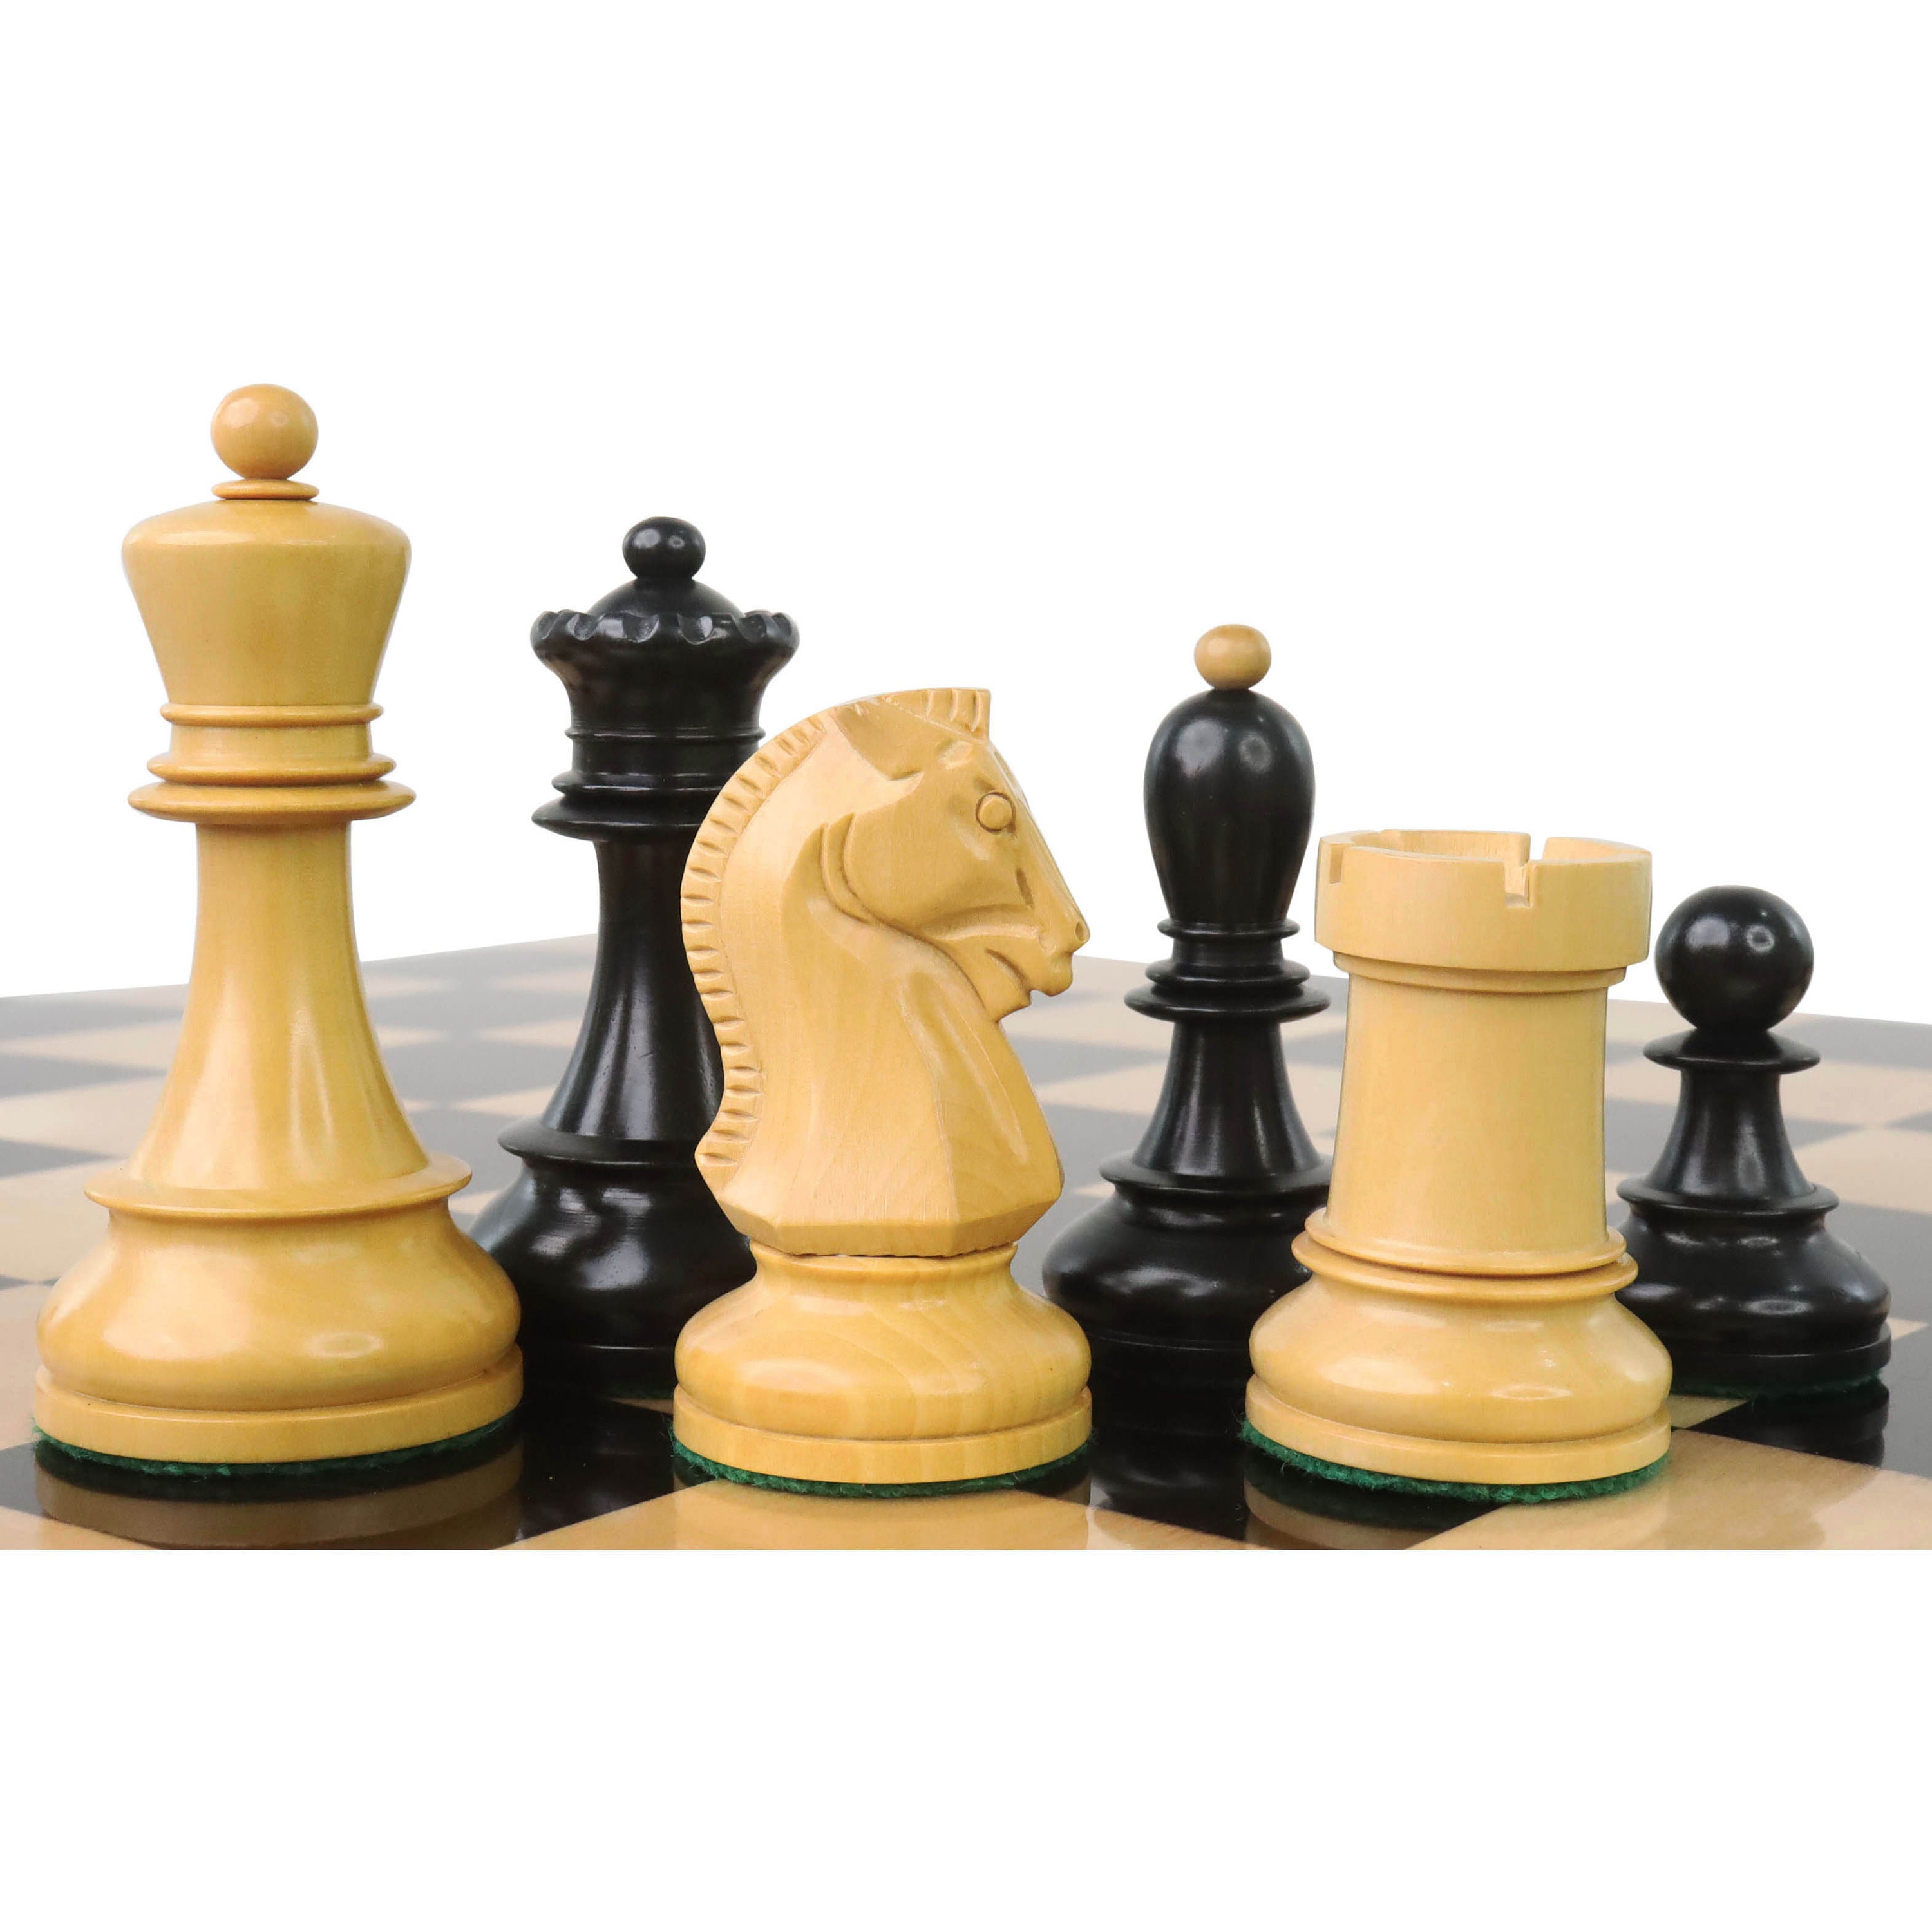 Dubrovnik Repro in Bud Rosewood Weighted Chess Set in Version 3.0